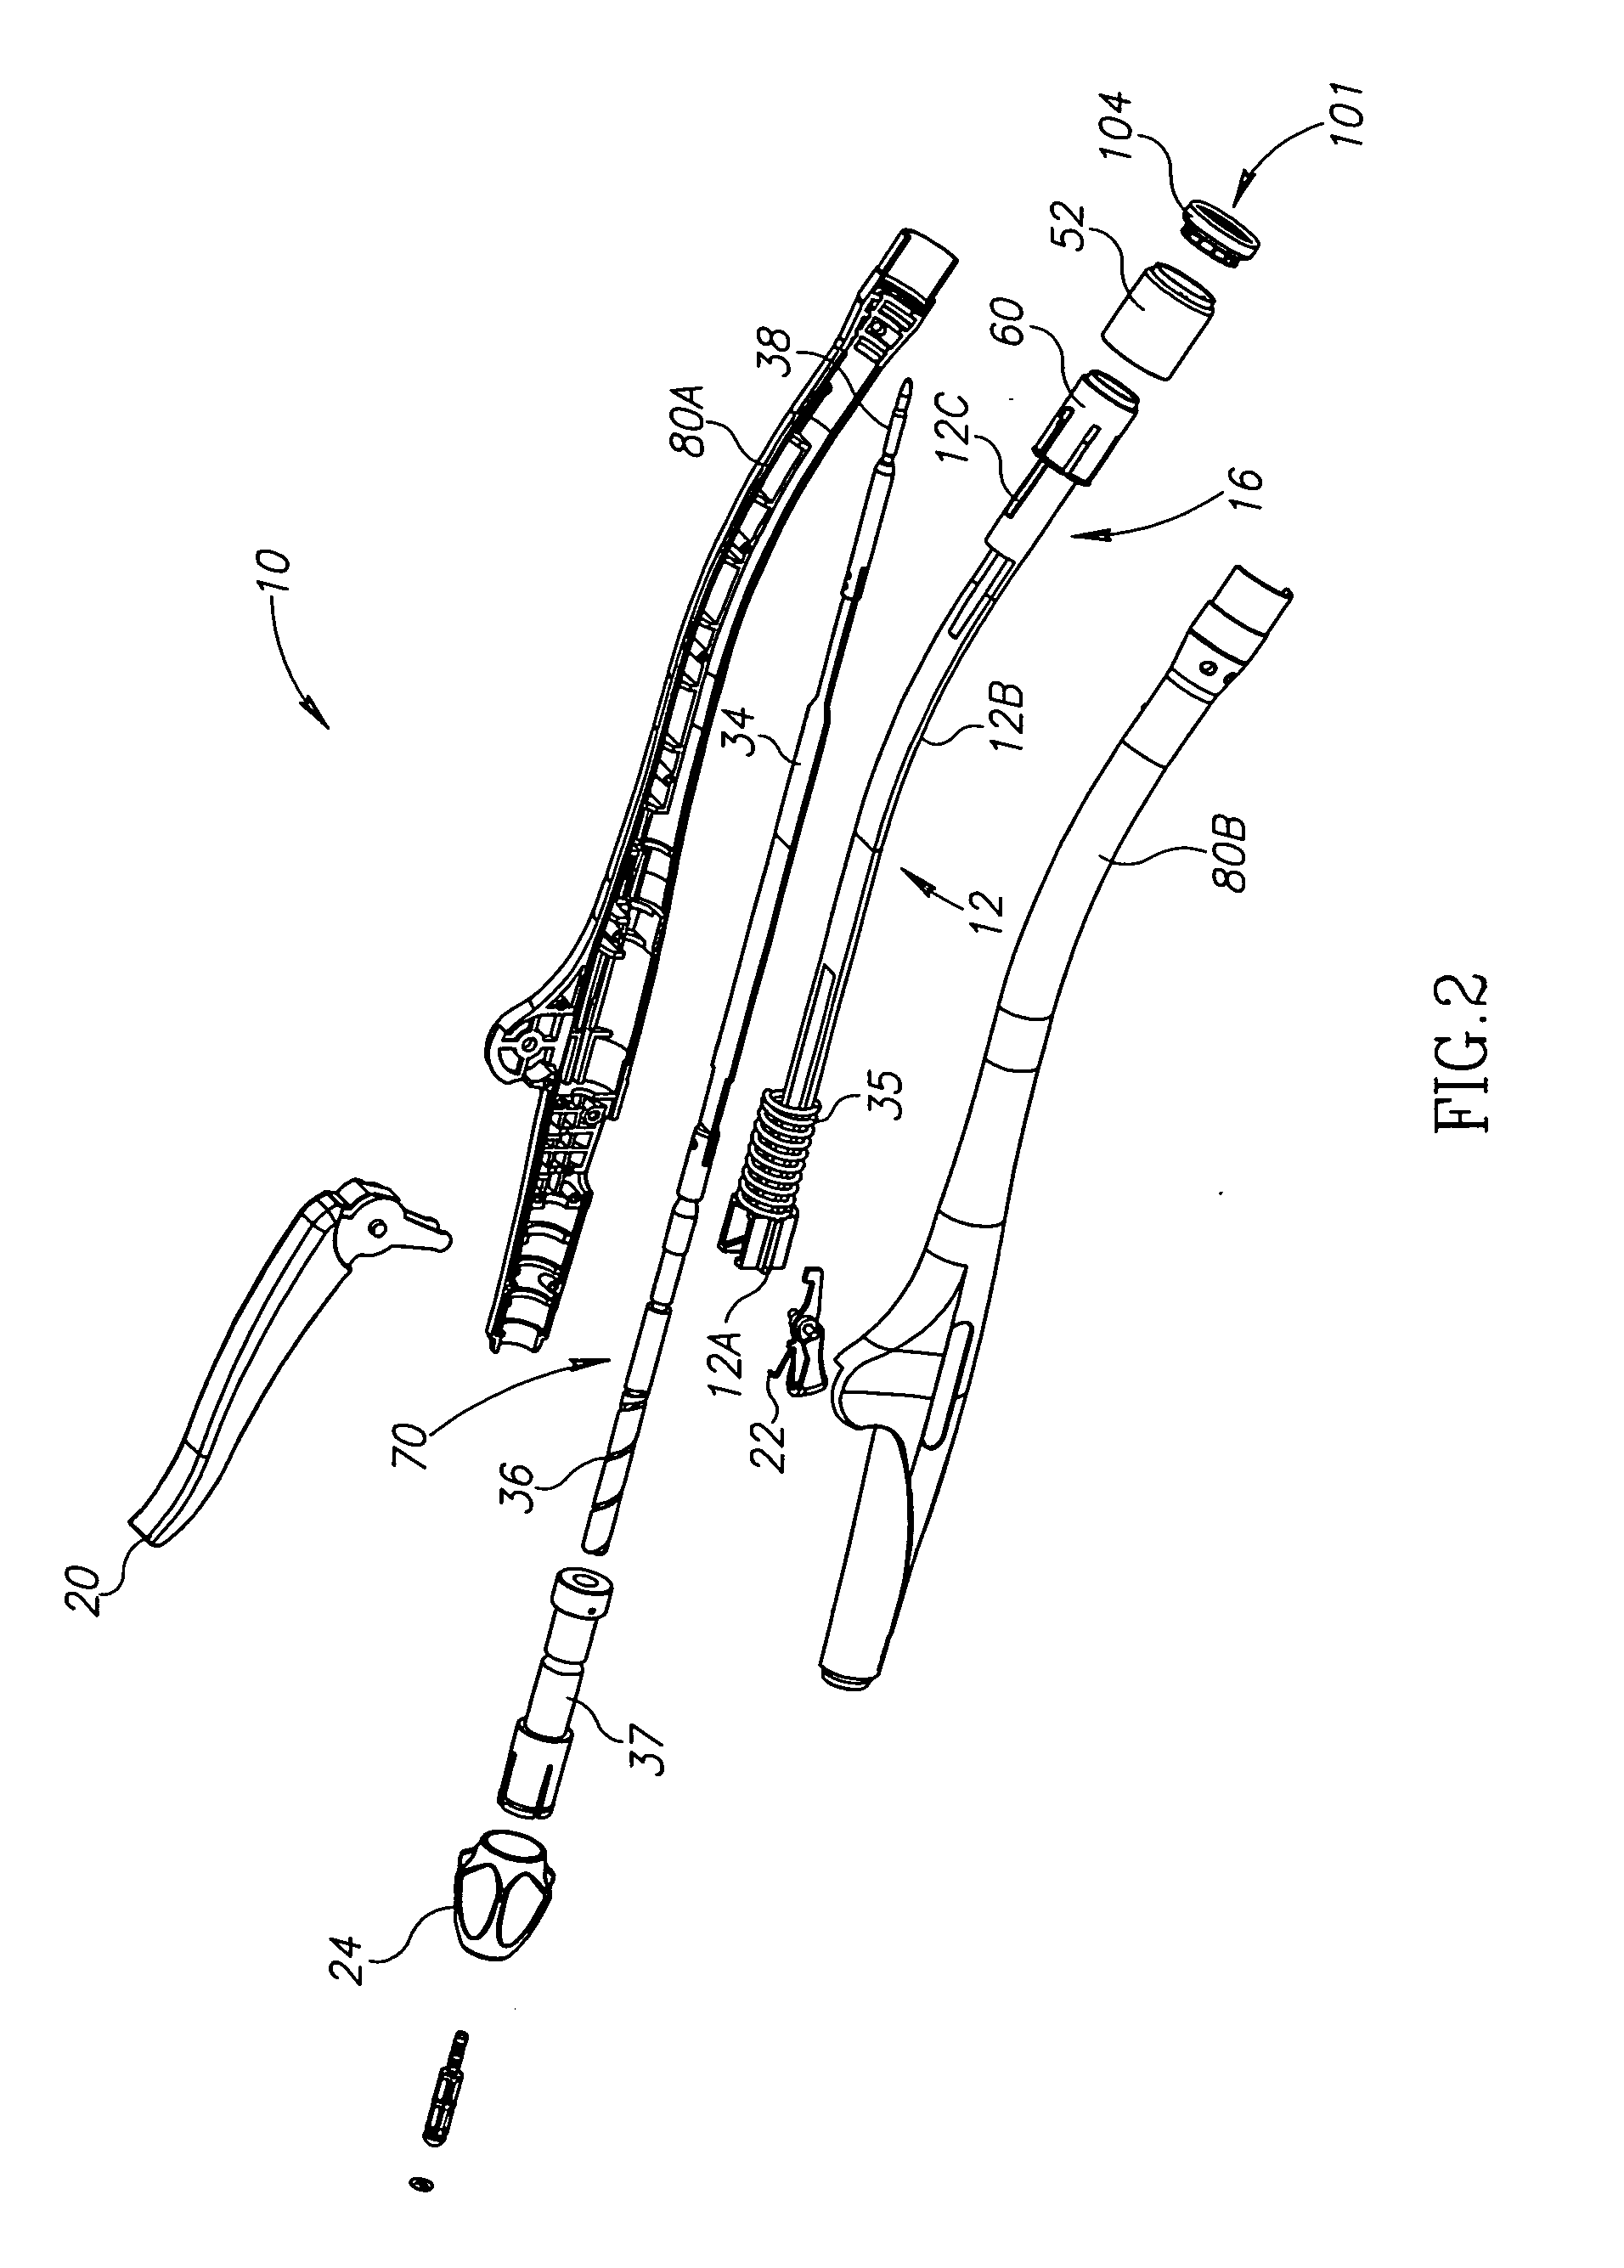 Compression anastomosis ring assembly and applicator for use therewith